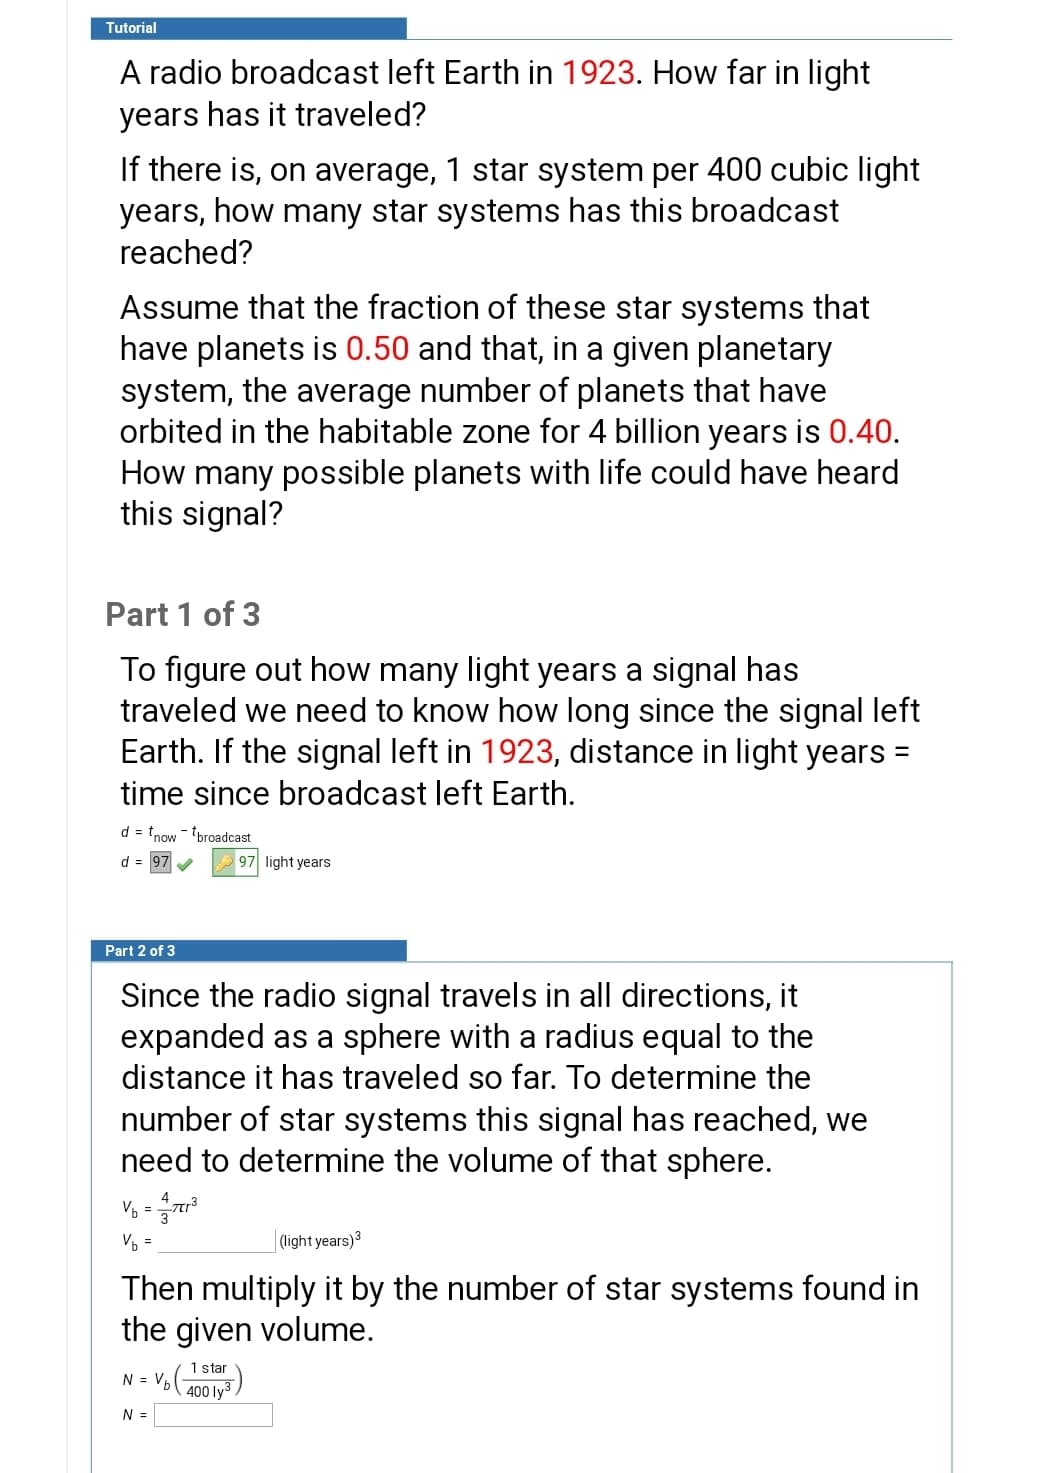 Tutorial
A radio broadcast left Earth in 1923. How far in light
years has it traveled?
If there is, on average, 1 star system per 400 cubic light
years, how many star systems has this broadcast
reached?
Assume that the fraction of these star systems that
have planets is 0.50 and that, in a given planetary
system, the average number of planets that have
orbited in the habitable zone for 4 billion years is 0.40.
How many possible planets with life could have heard
this signal?
Part 1 of 3
To figure out how many light years a signal has
traveled we need to know how long since the signal left
Earth. If the signal left in 1923, distance in light years =
time since broadcast left Earth.
d = tnow - broadcast
d = 97
97 light years
Part 2 of 3
Since the radio signal travels in all directions, it
expanded as a sphere with a radius equal to the
distance it has traveled so far. To determine the
number of star systems this signal has reached, we
need to determine the volume of that sphere.
V, =
Vb =
| light years)3
Then multiply it by the number of star systems found in
the given volume.
1 star
N = V600 lv3
N =
